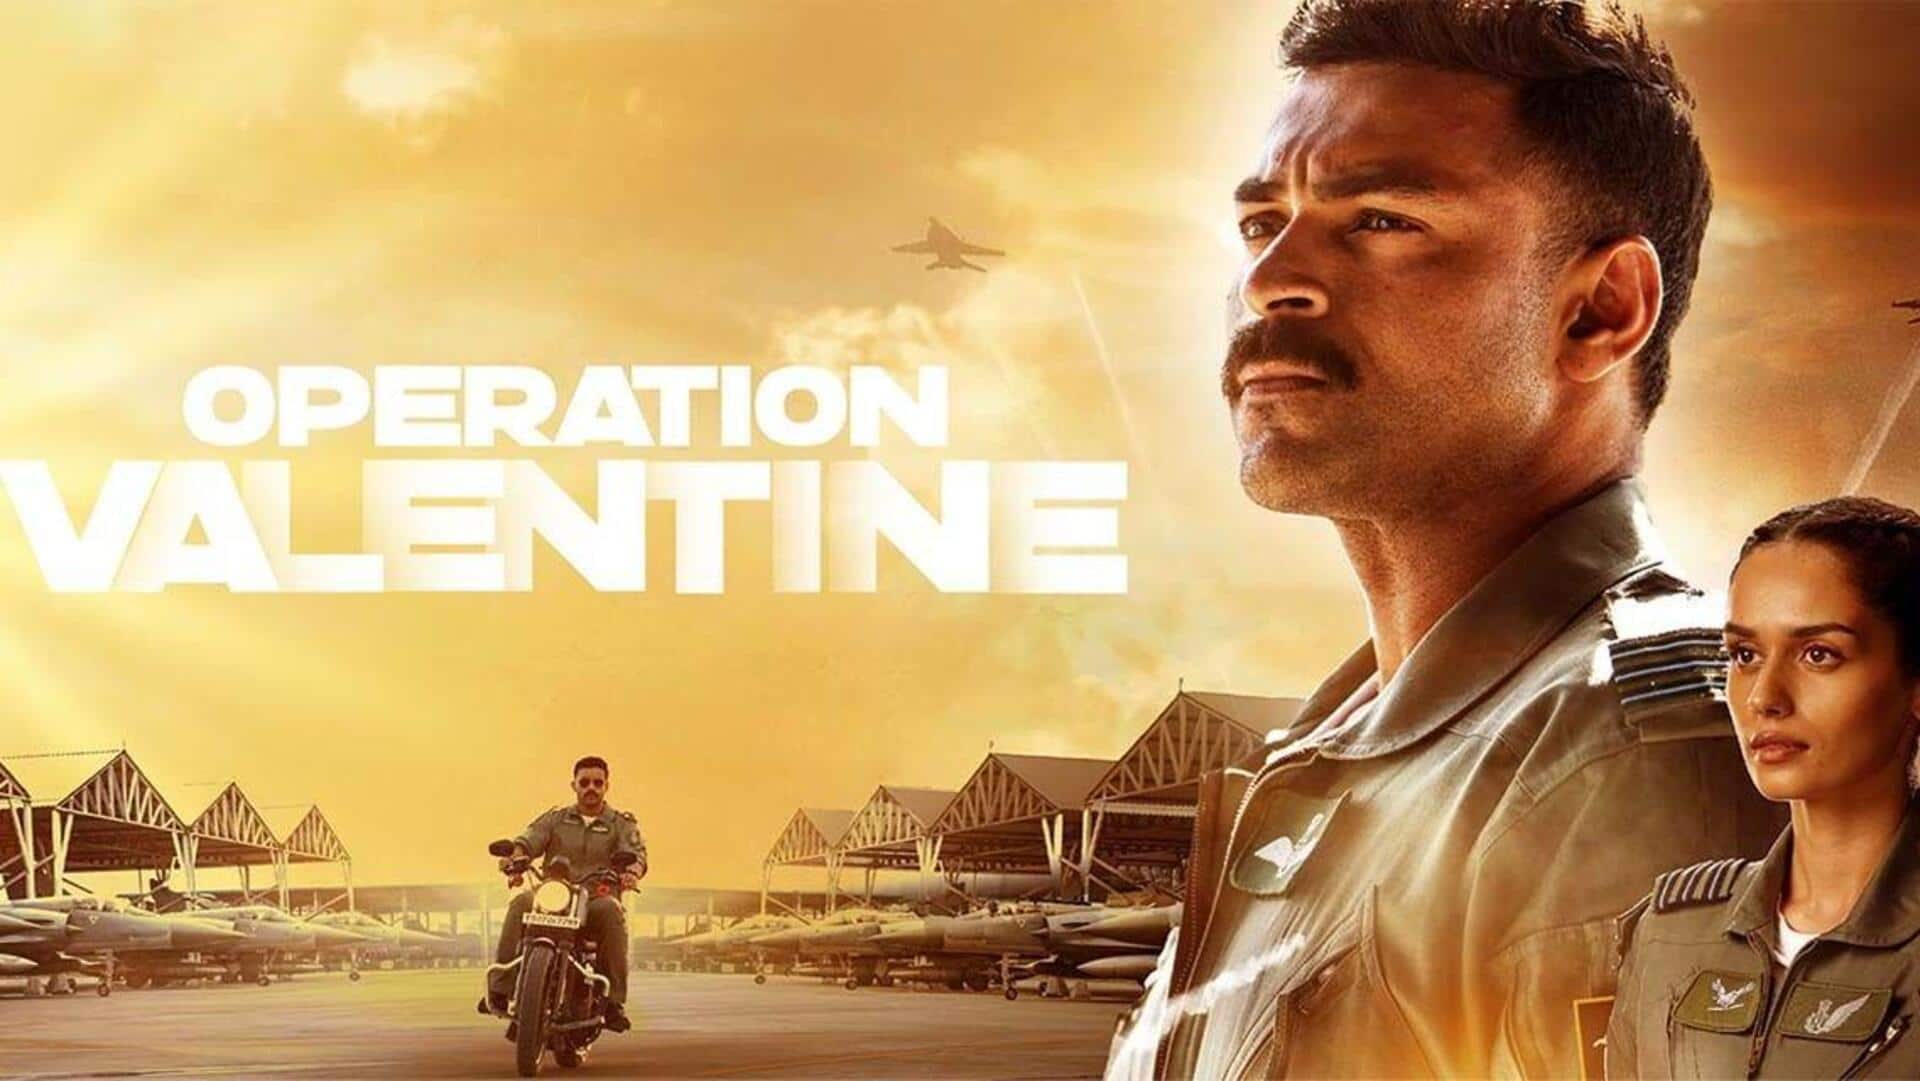 Box office buzz: 'Operation Valentine' is set for lukewarm opening